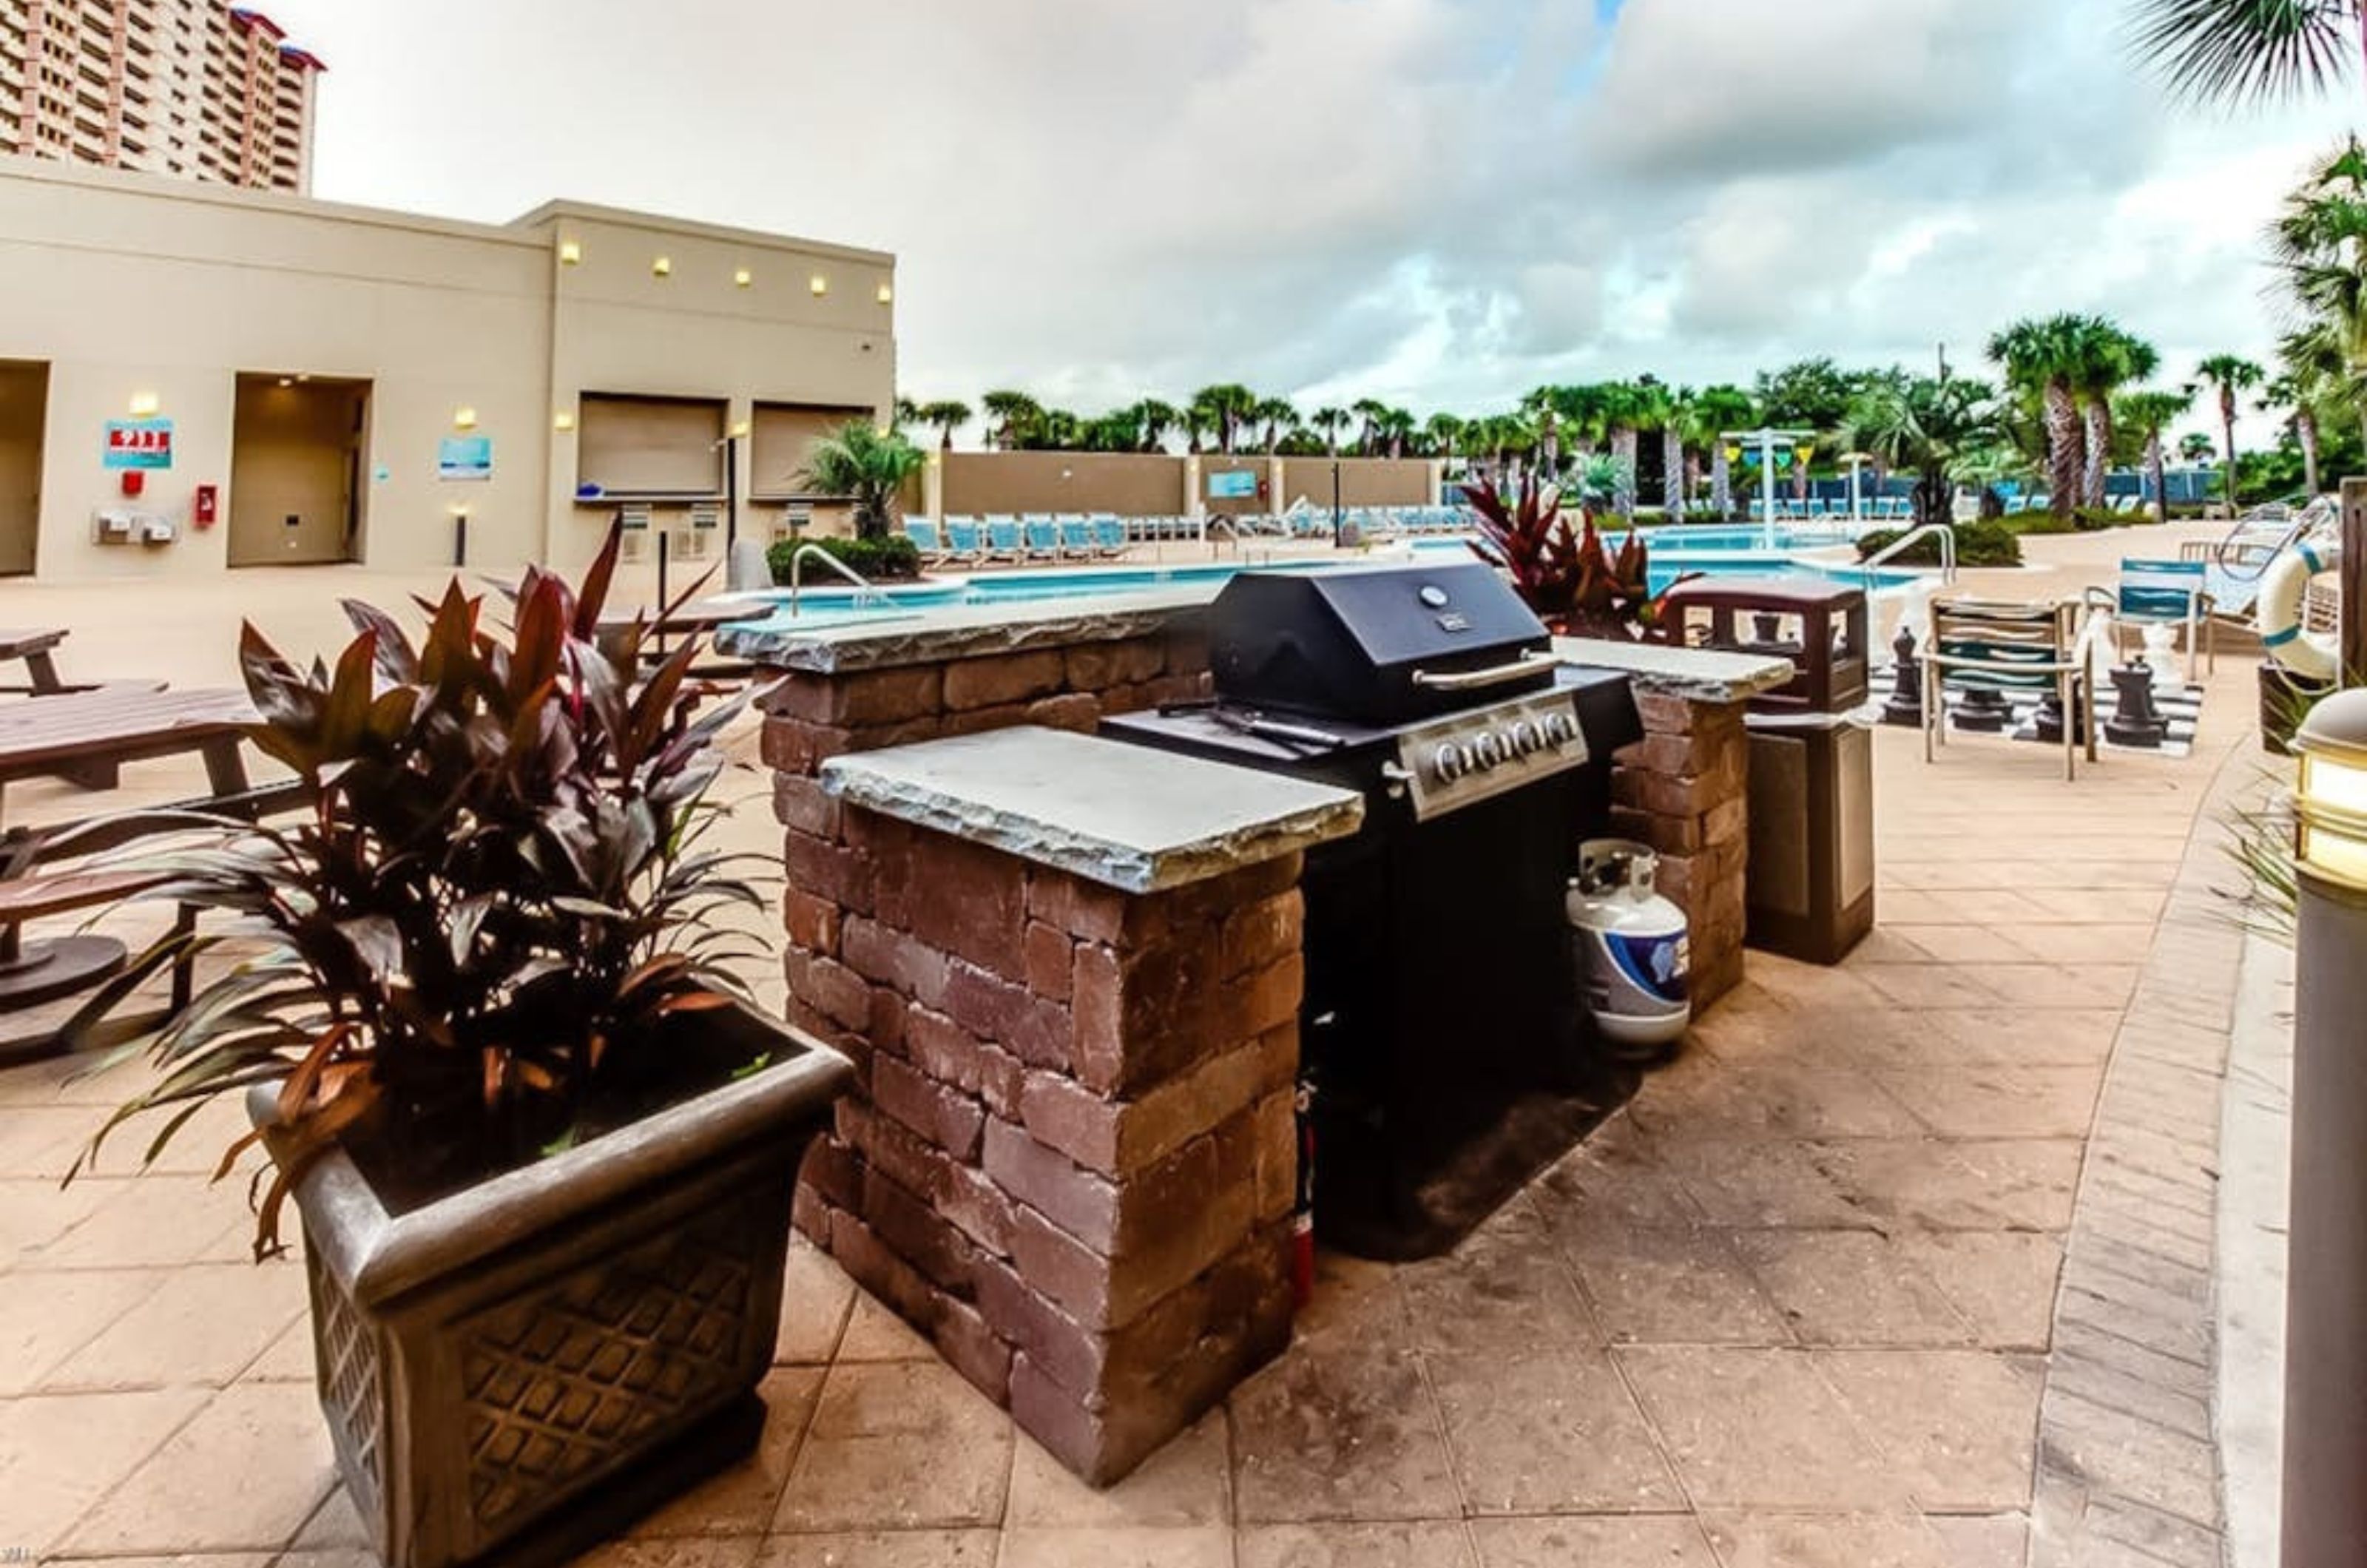 Barbecue grills on the pool deck at Emerald Beach Resort in Panama City Beach Florida 